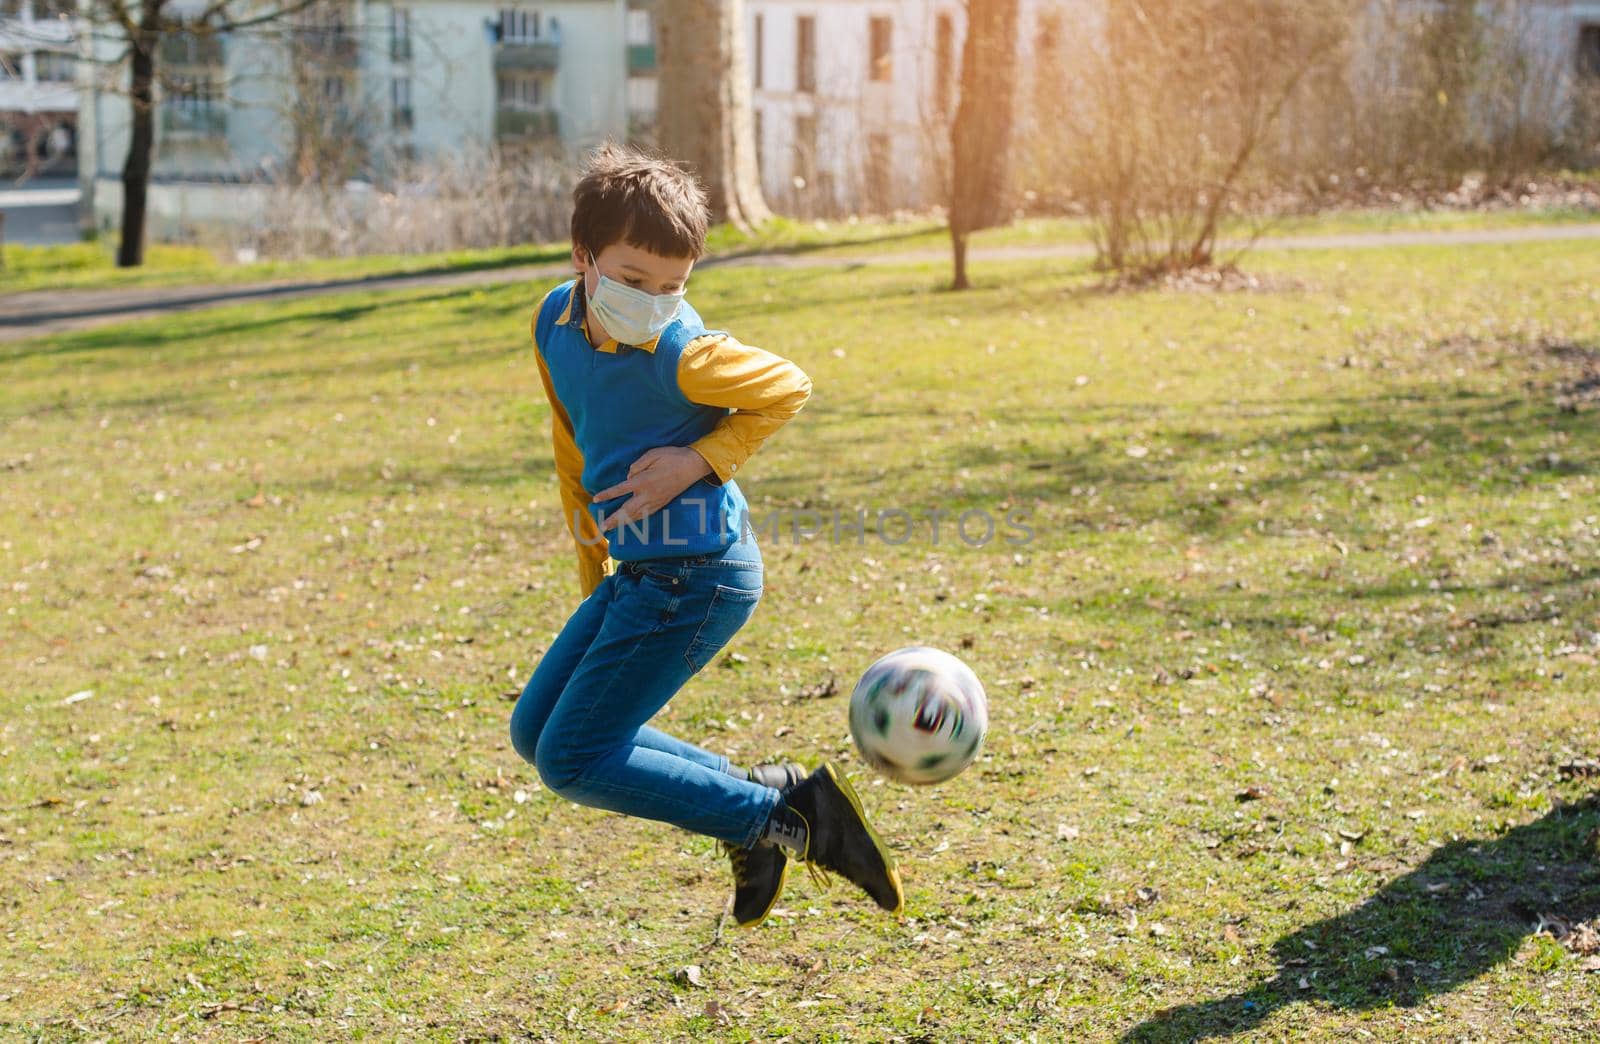 Boy playing football in the park despite the Covid-19 crisis by Kzenon